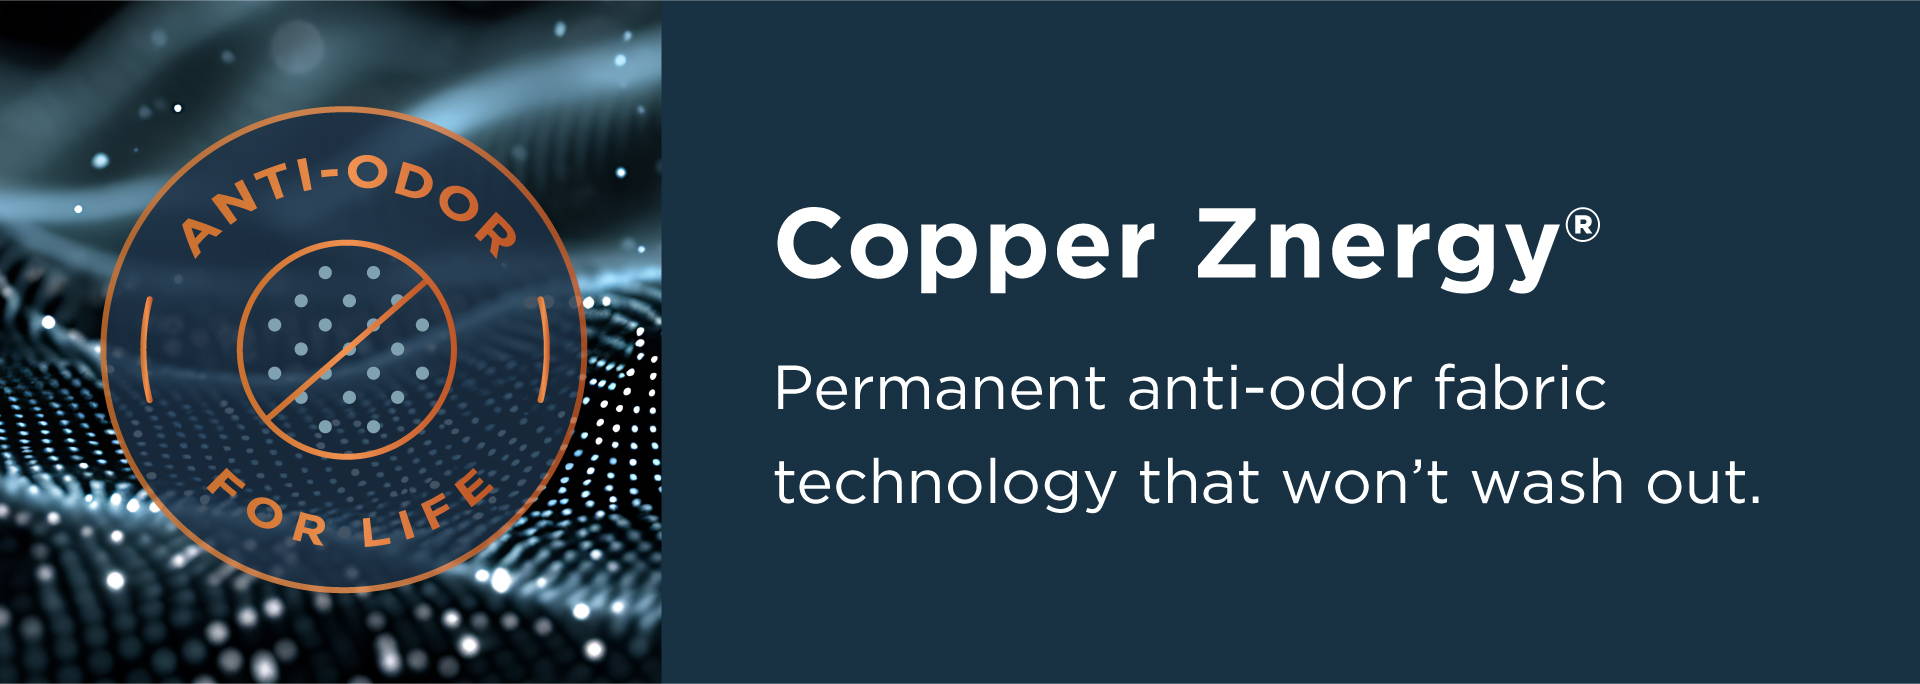 Copper Znergy permanent anti-odor technology that won't wash out.